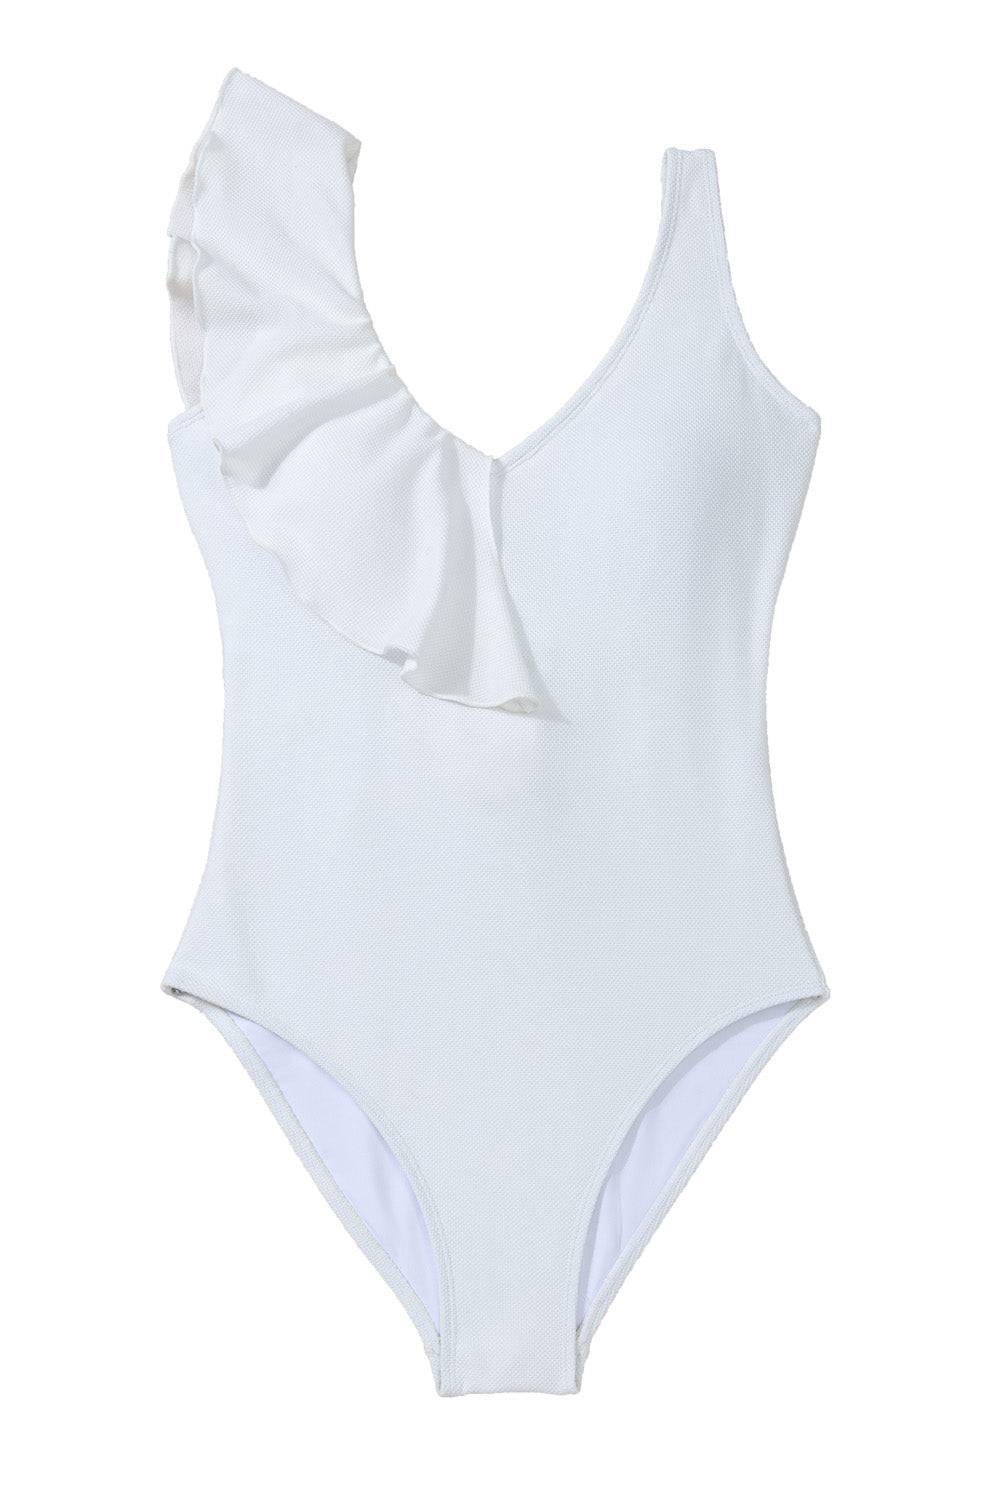 a white one piece swimsuit with ruffles